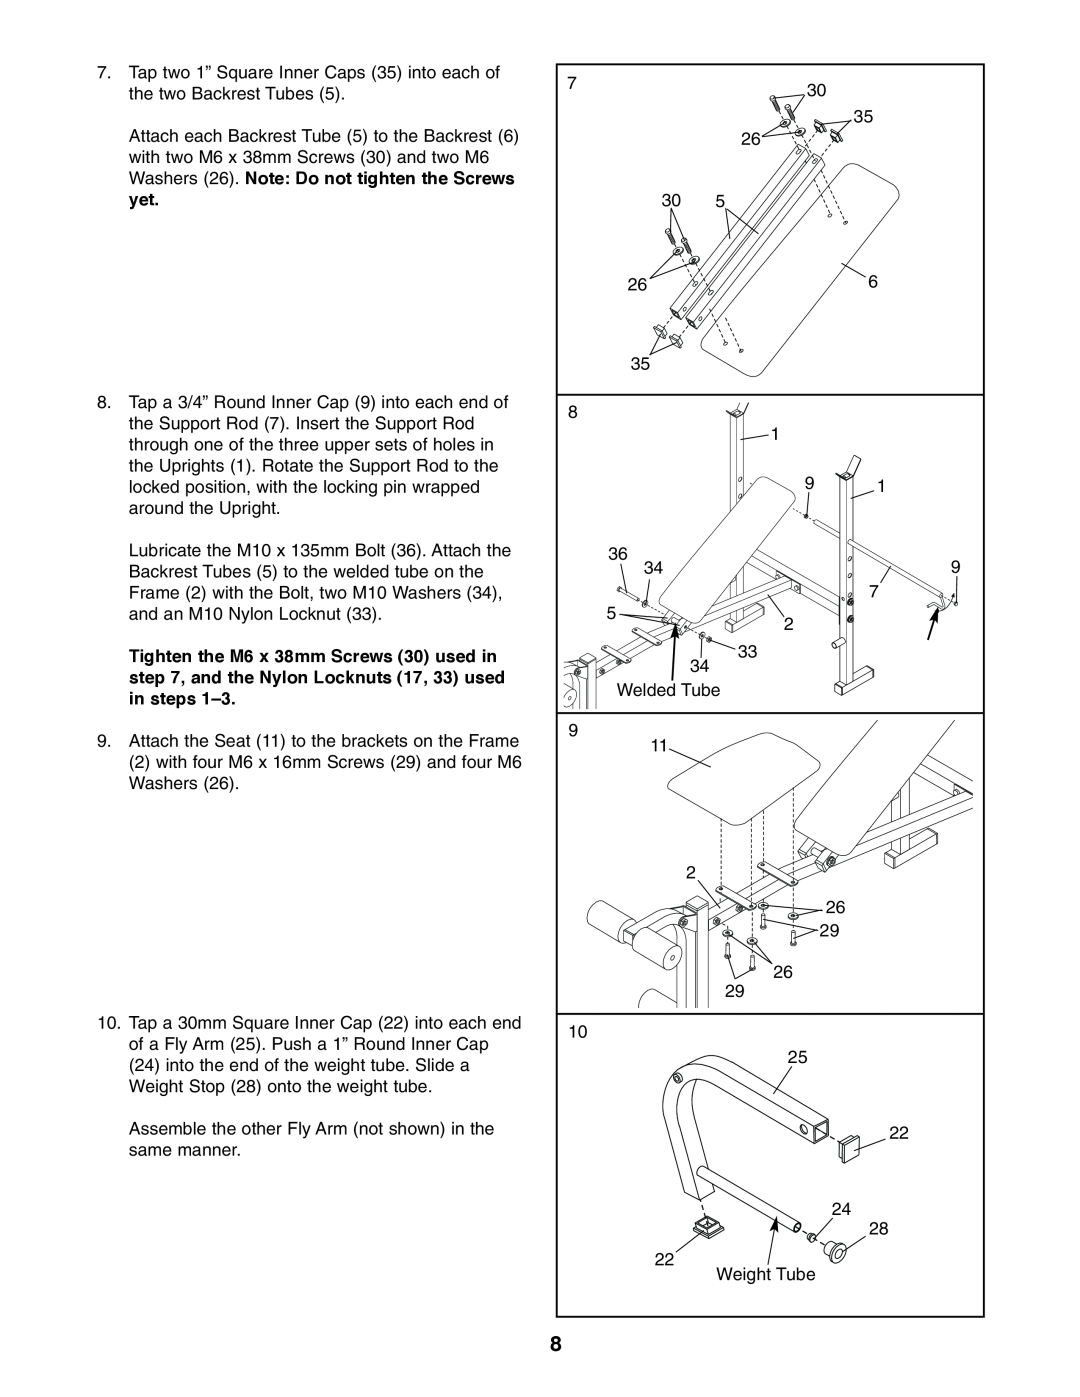 Weslo WEBE13810 user manual Washers 26. Note Do not tighten the Screws, Tighten the M6 x 38mm Screws 30 used in, in steps 